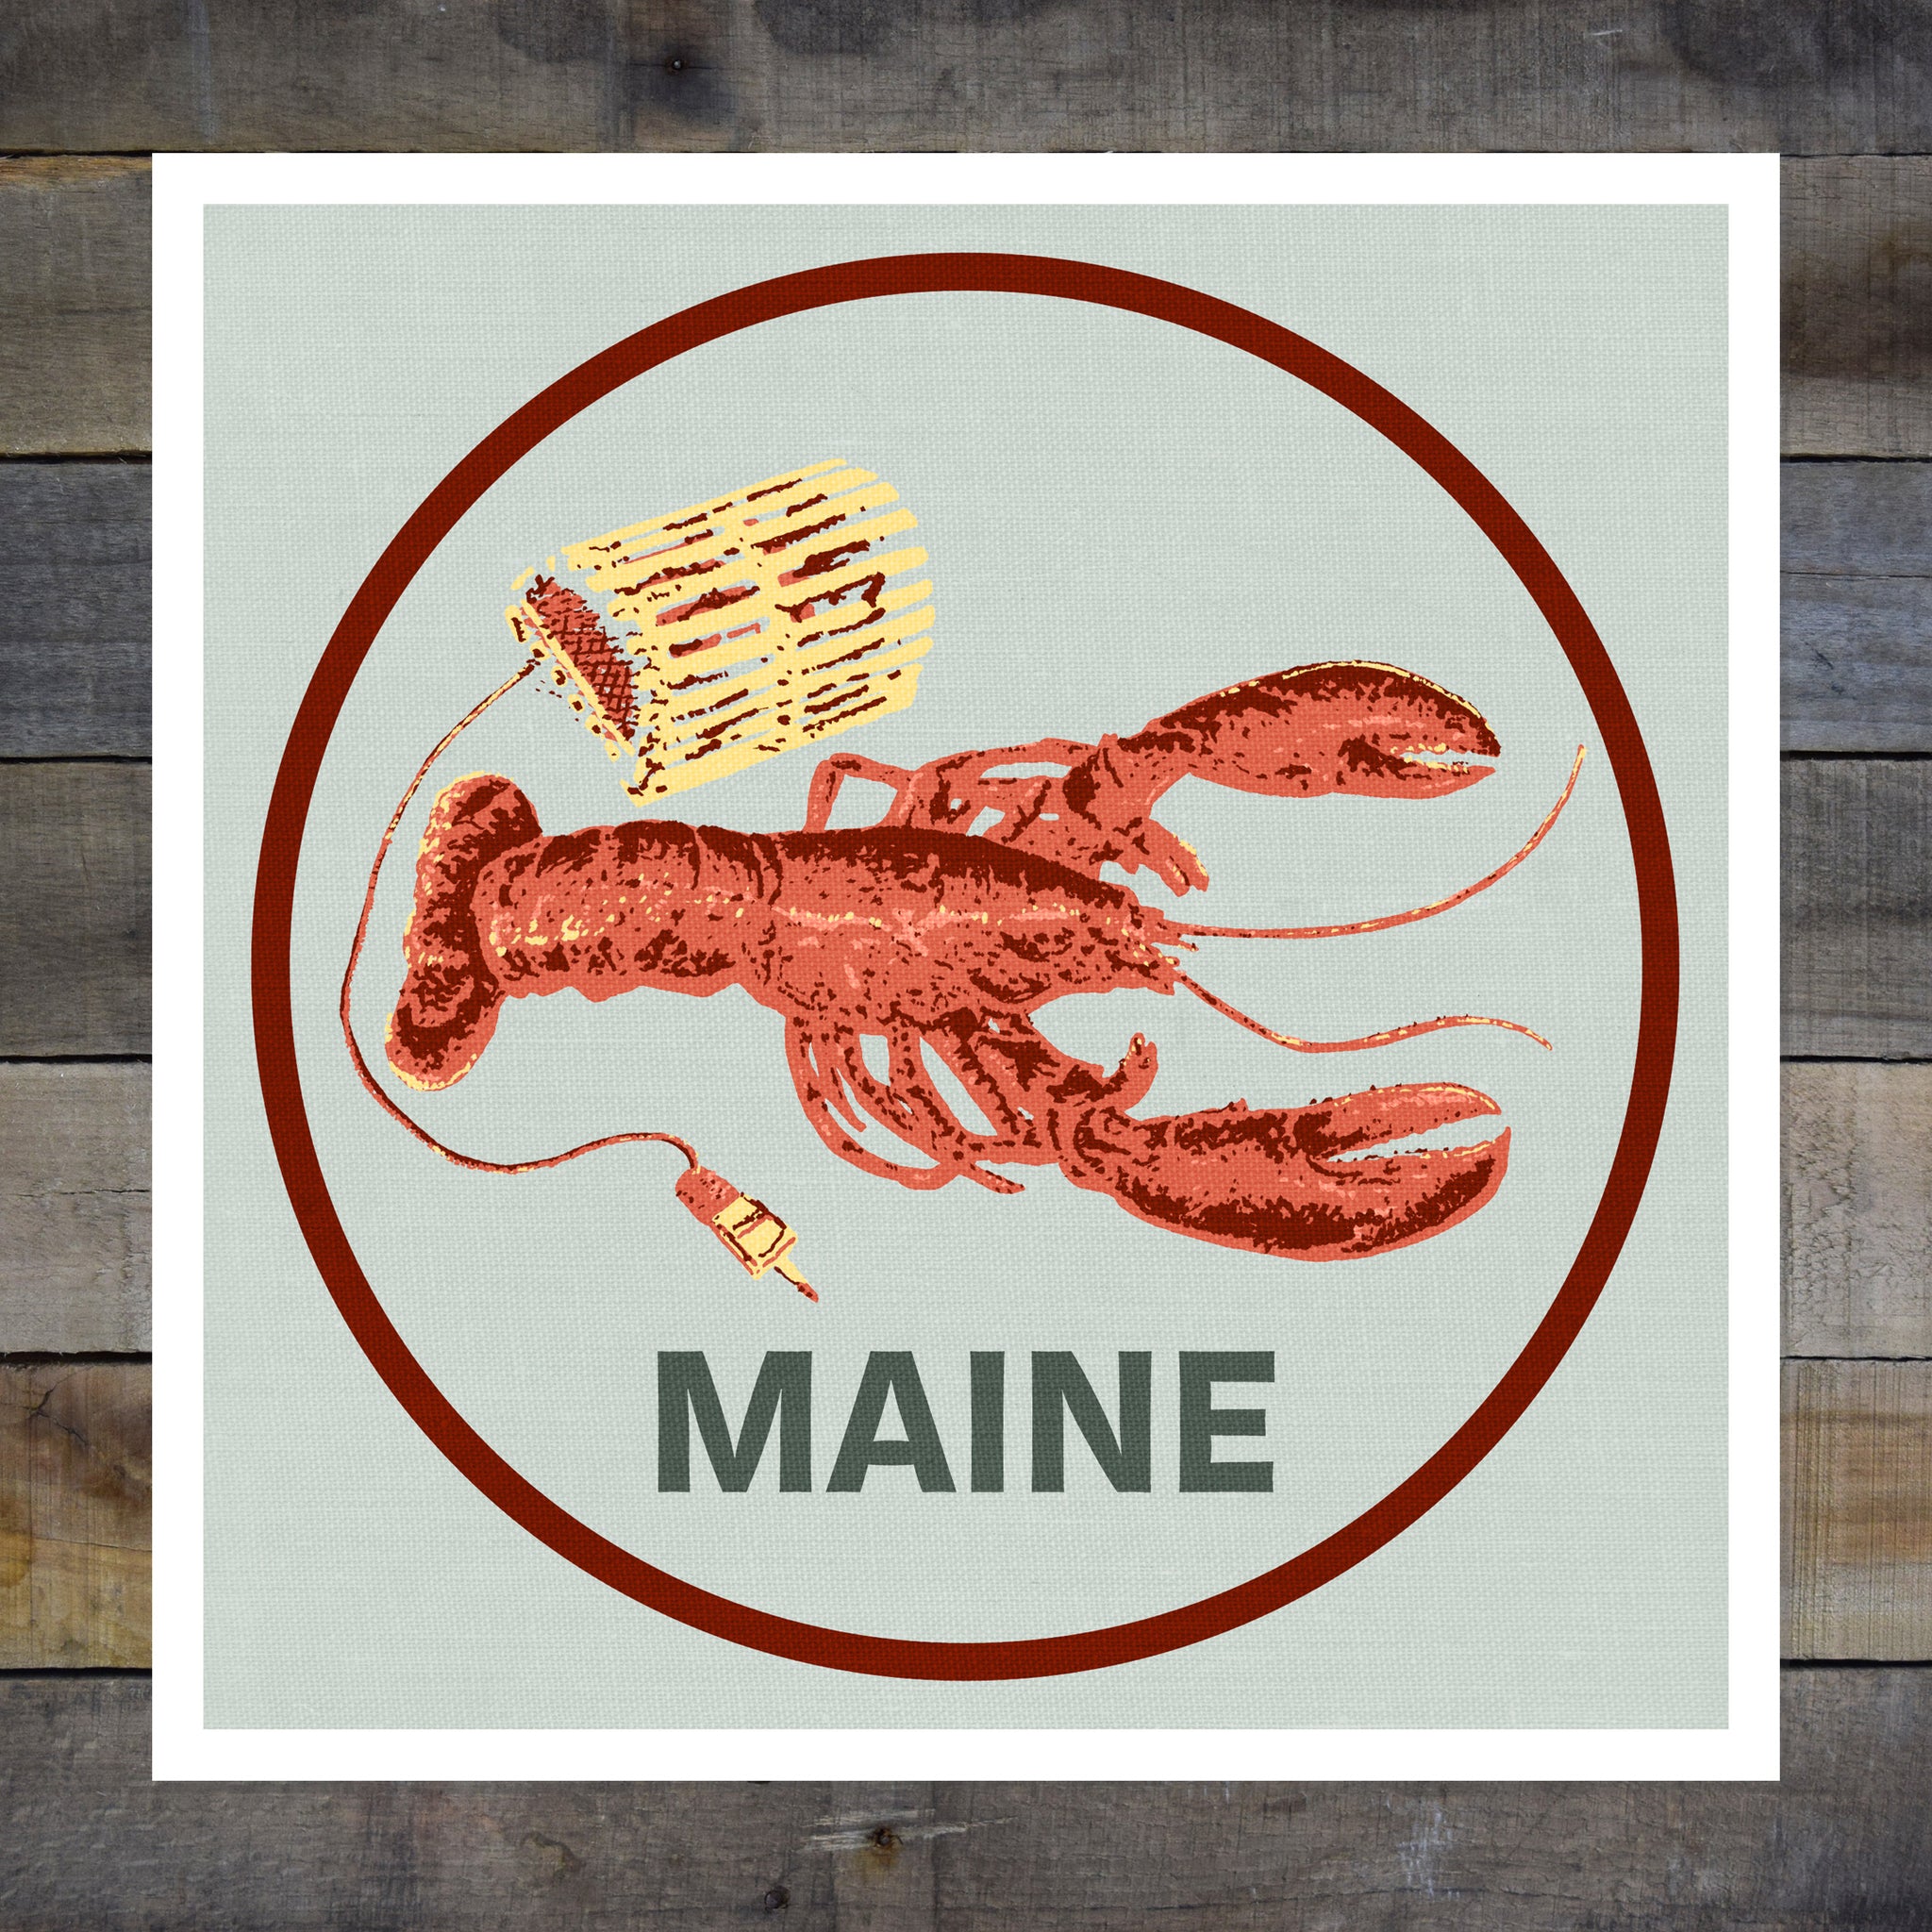 Maine Red Lobster 8x8in Giclee Print